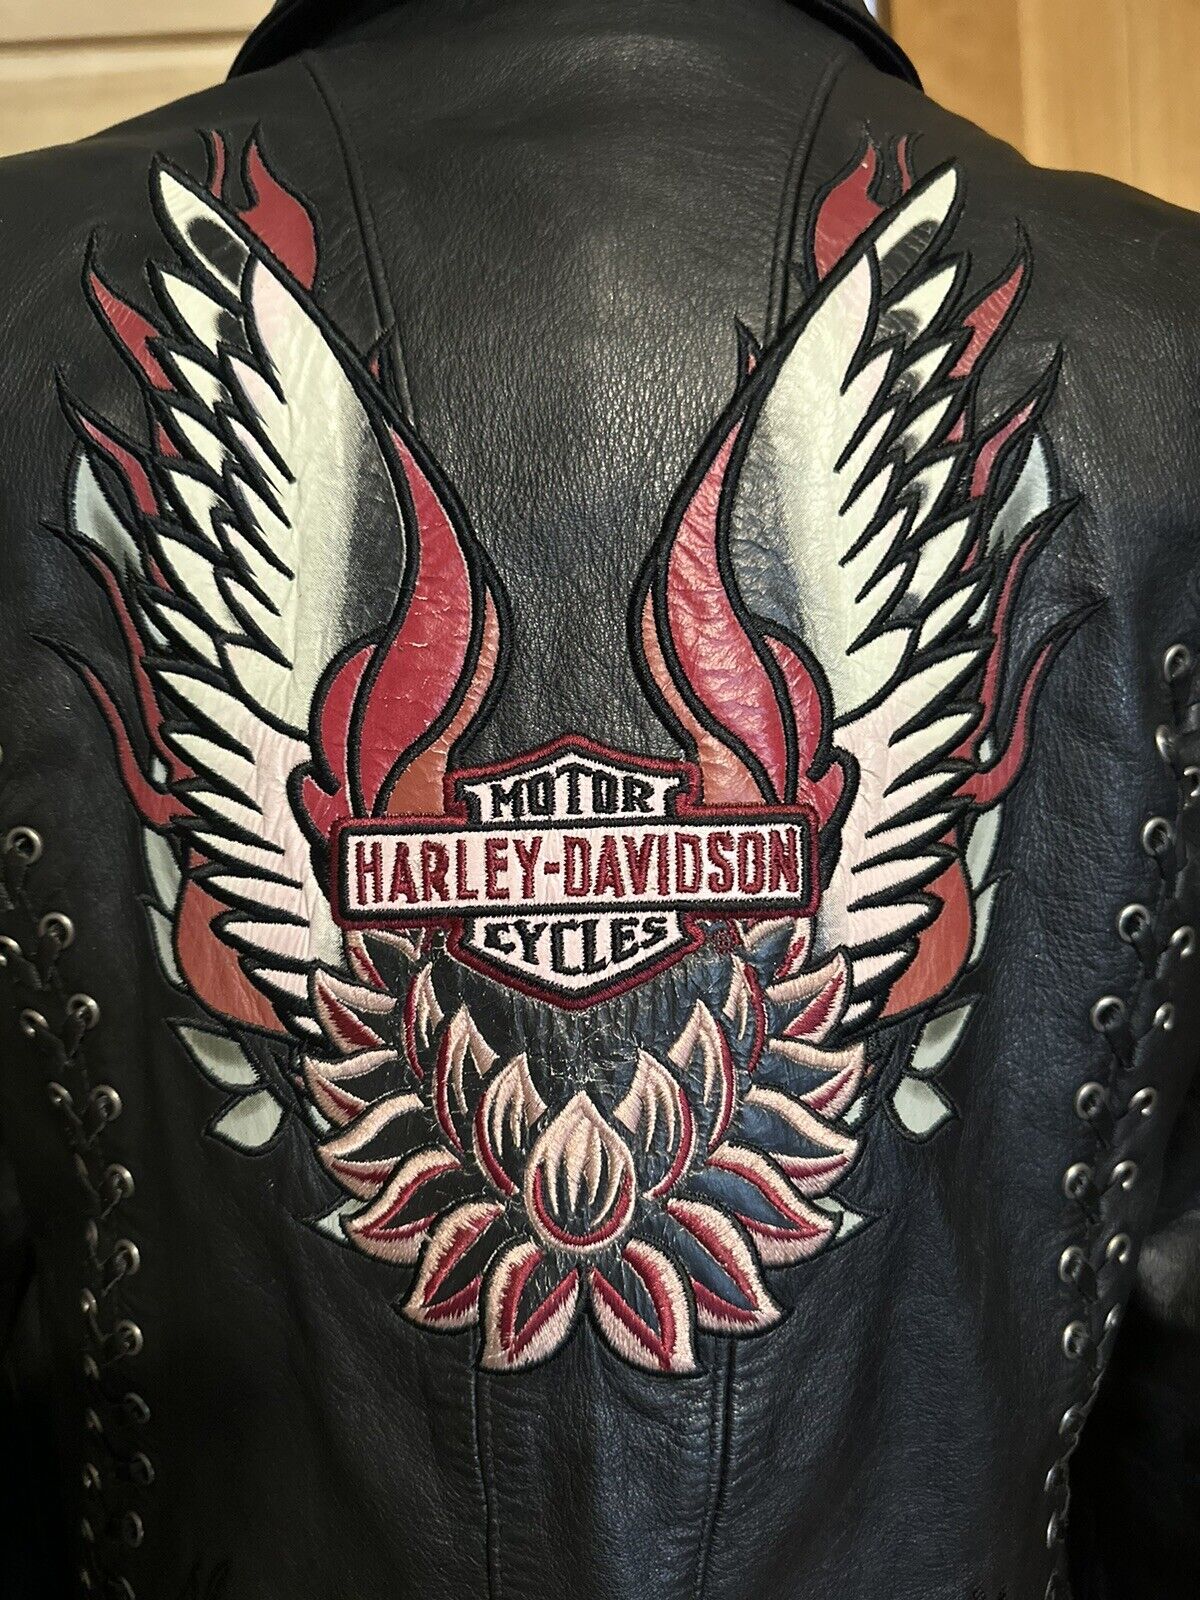 Harley Davidson GYPSY ROAD Laced Black Leather Womens Jacket Small With Chaps